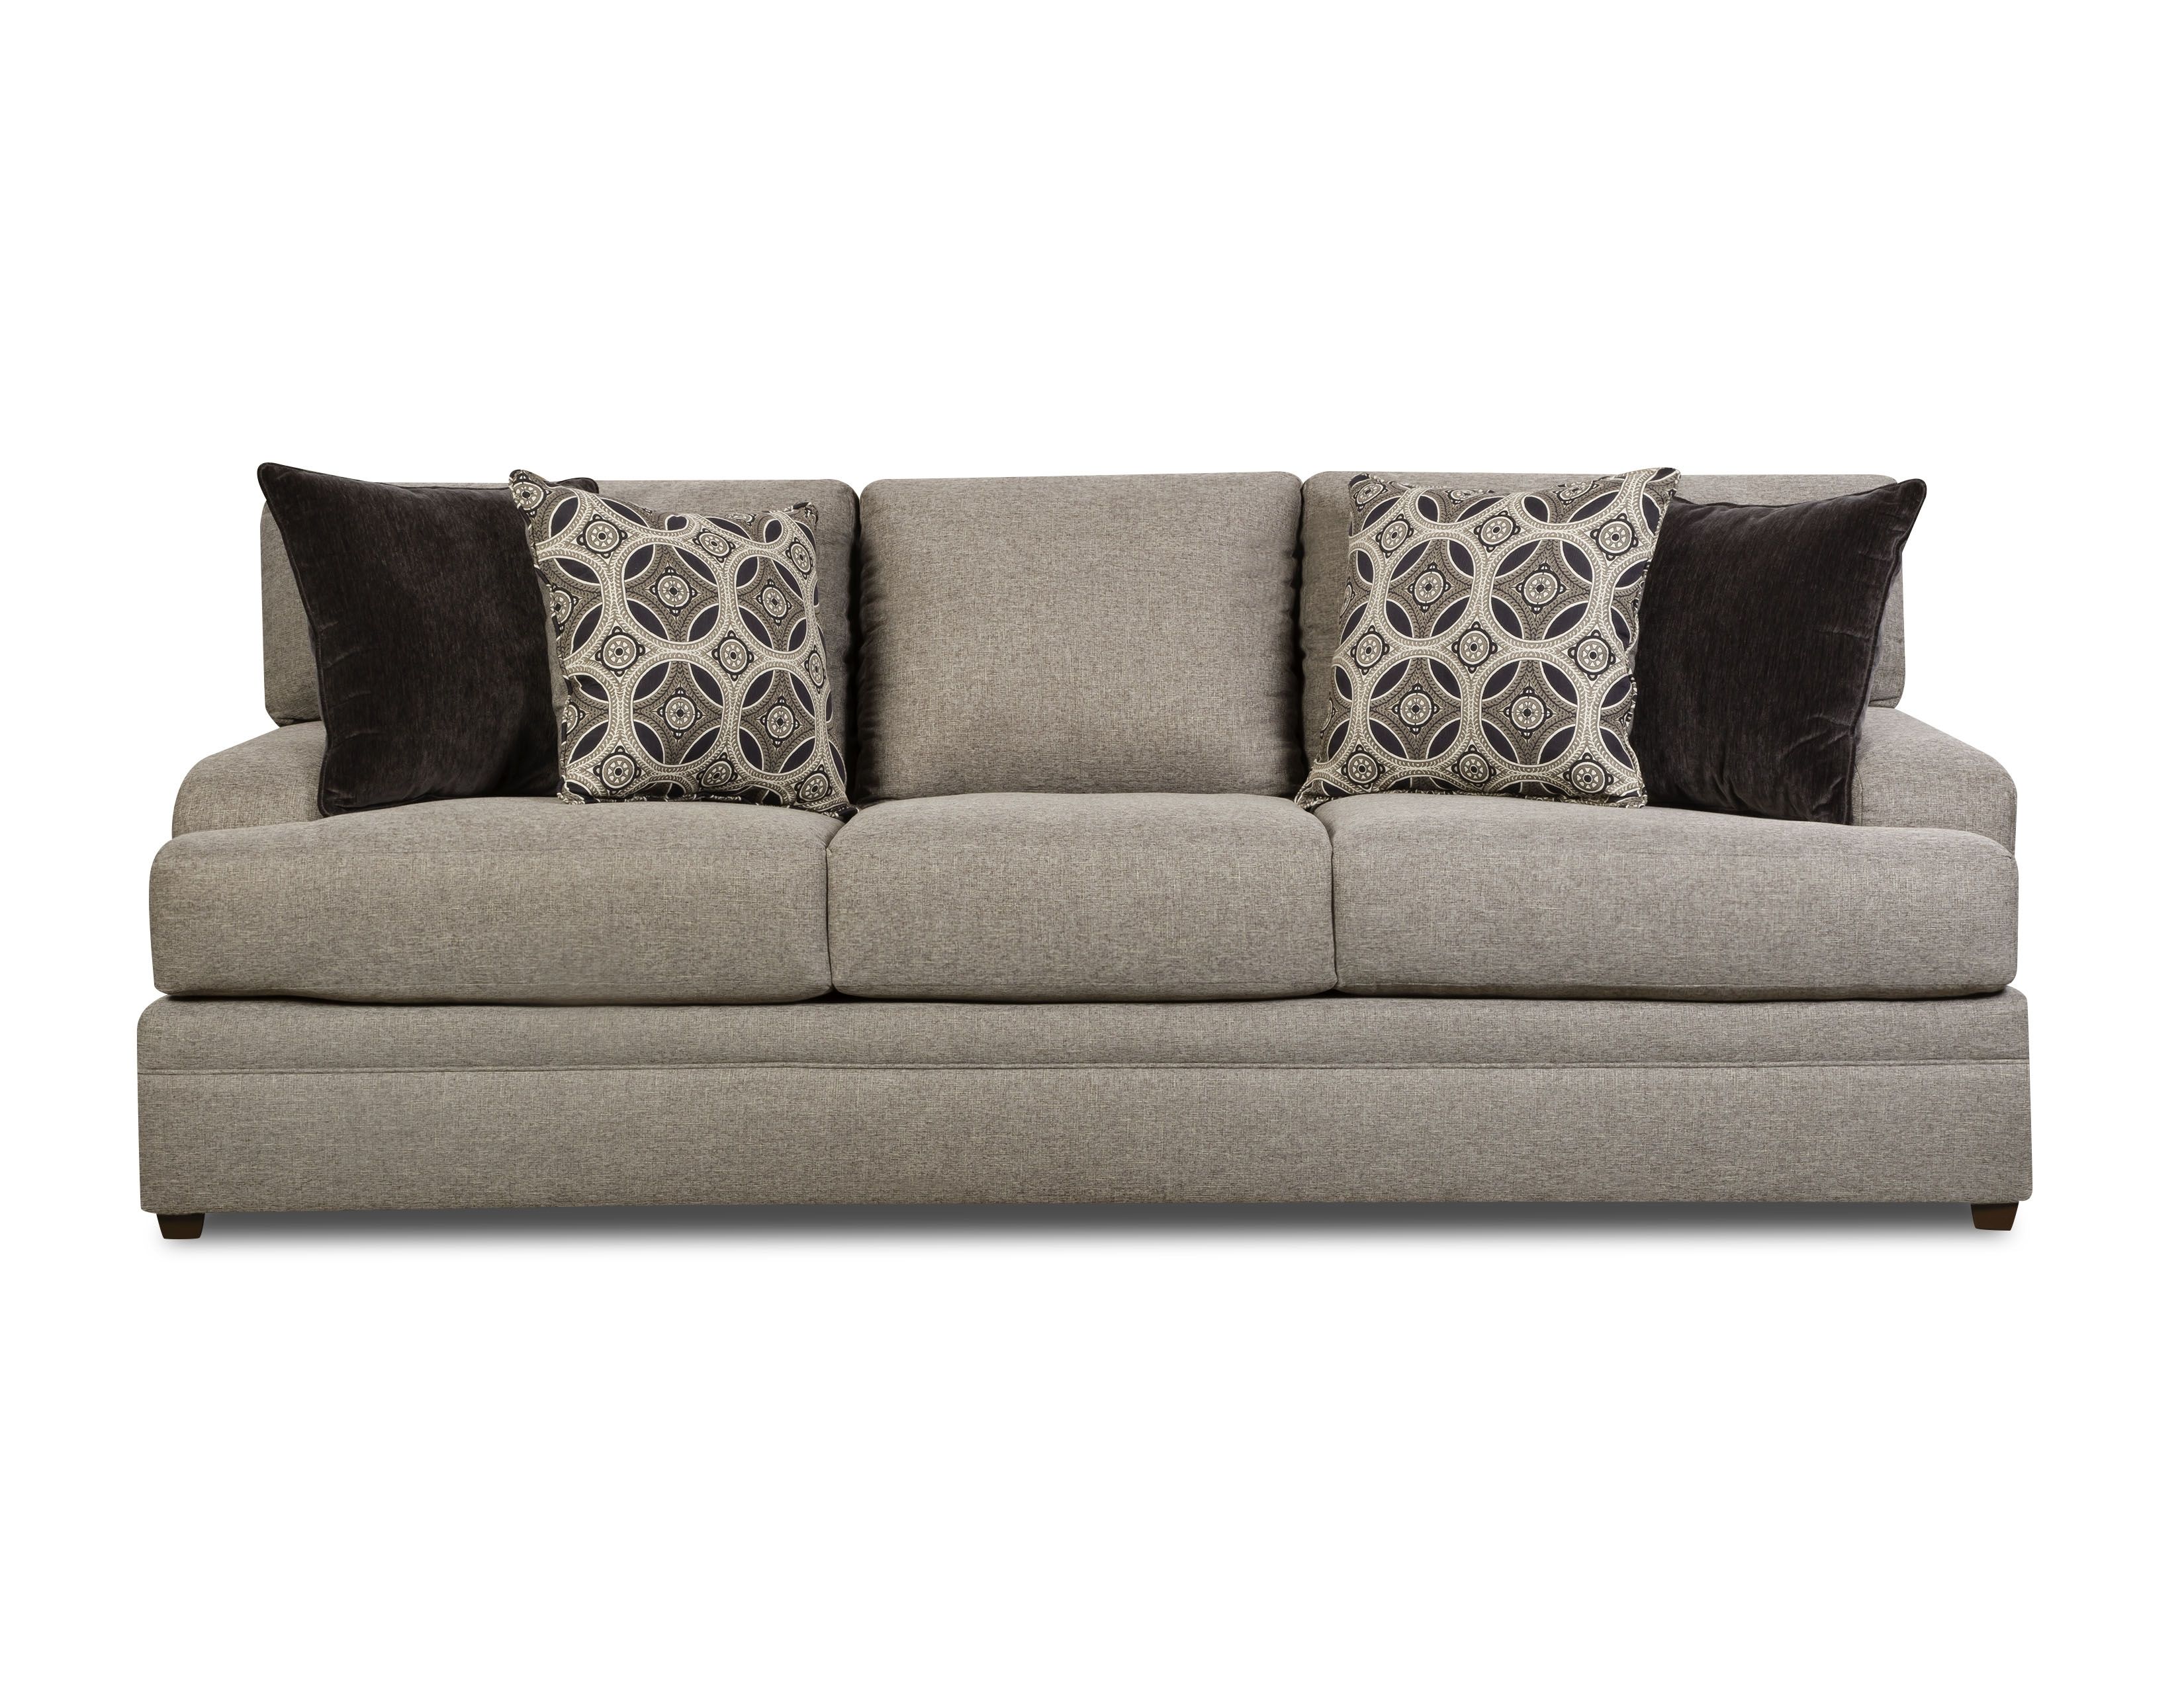 Sofa At Sears 89 With Sofa At Sears – Fjellkjeden For Sears Sofas (View 5 of 10)